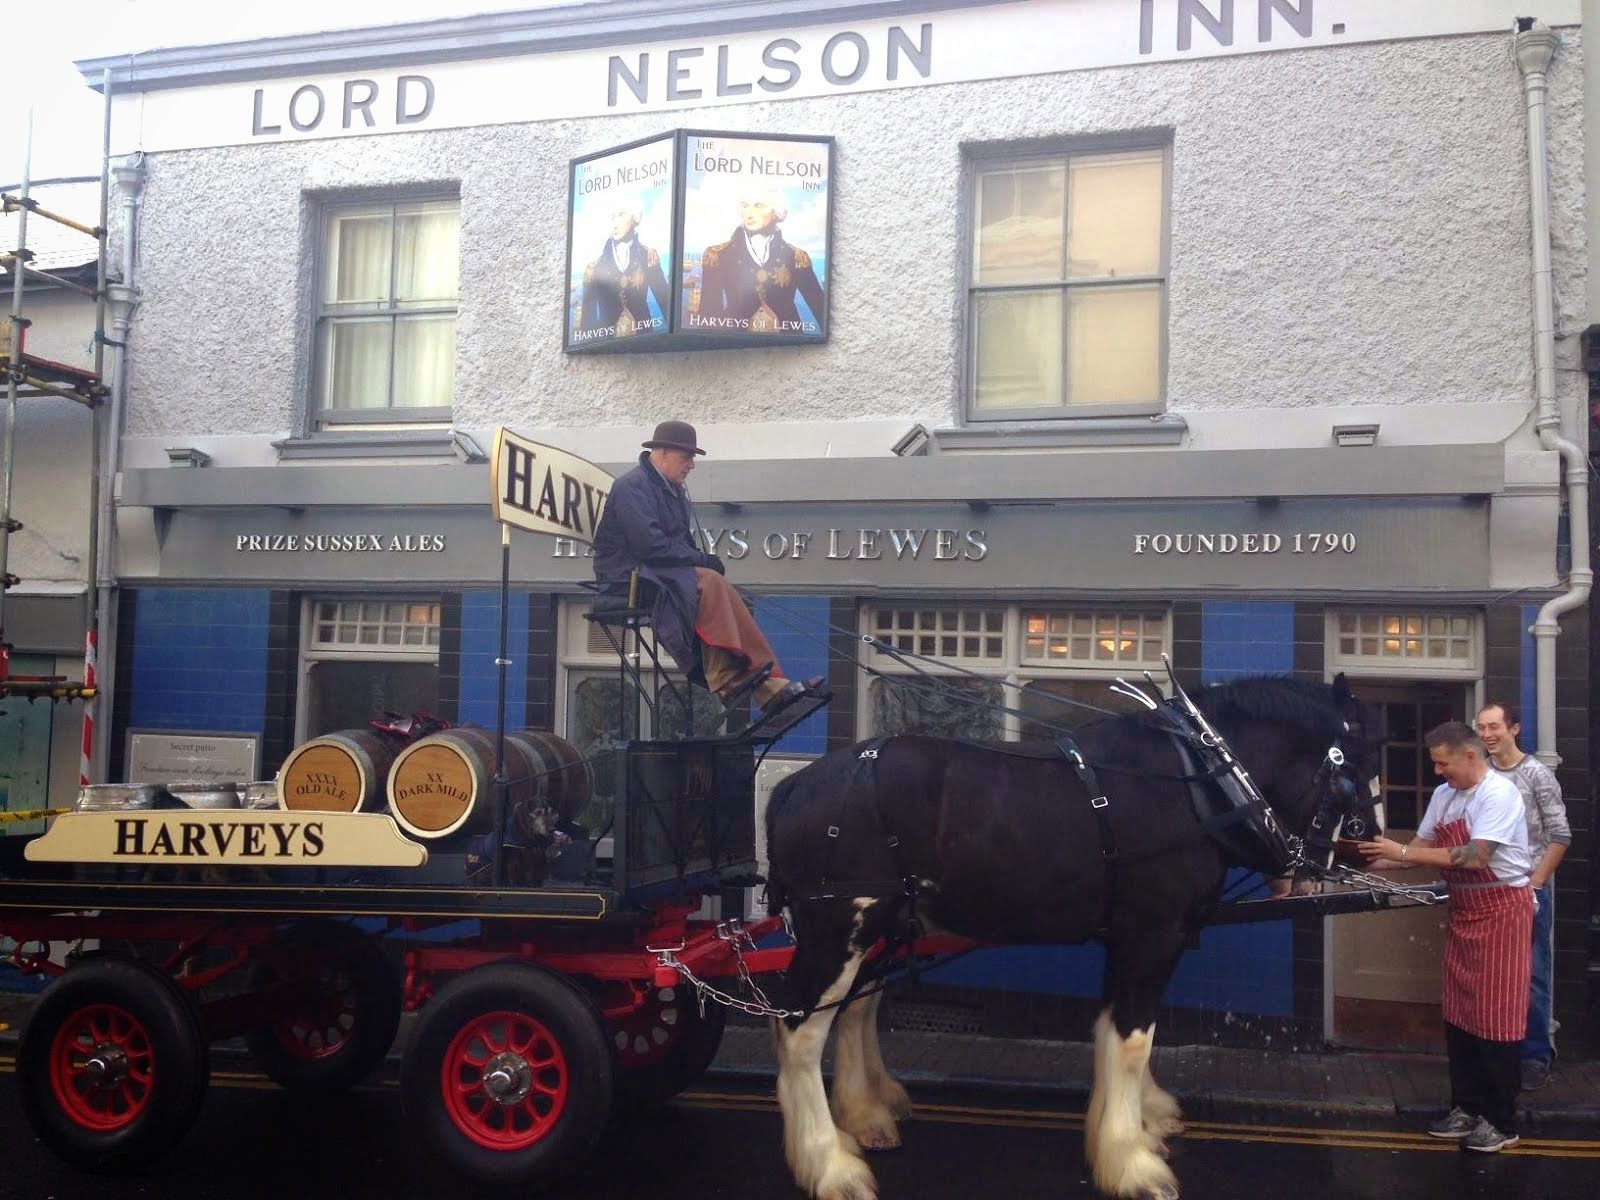 Real Ale delivery!